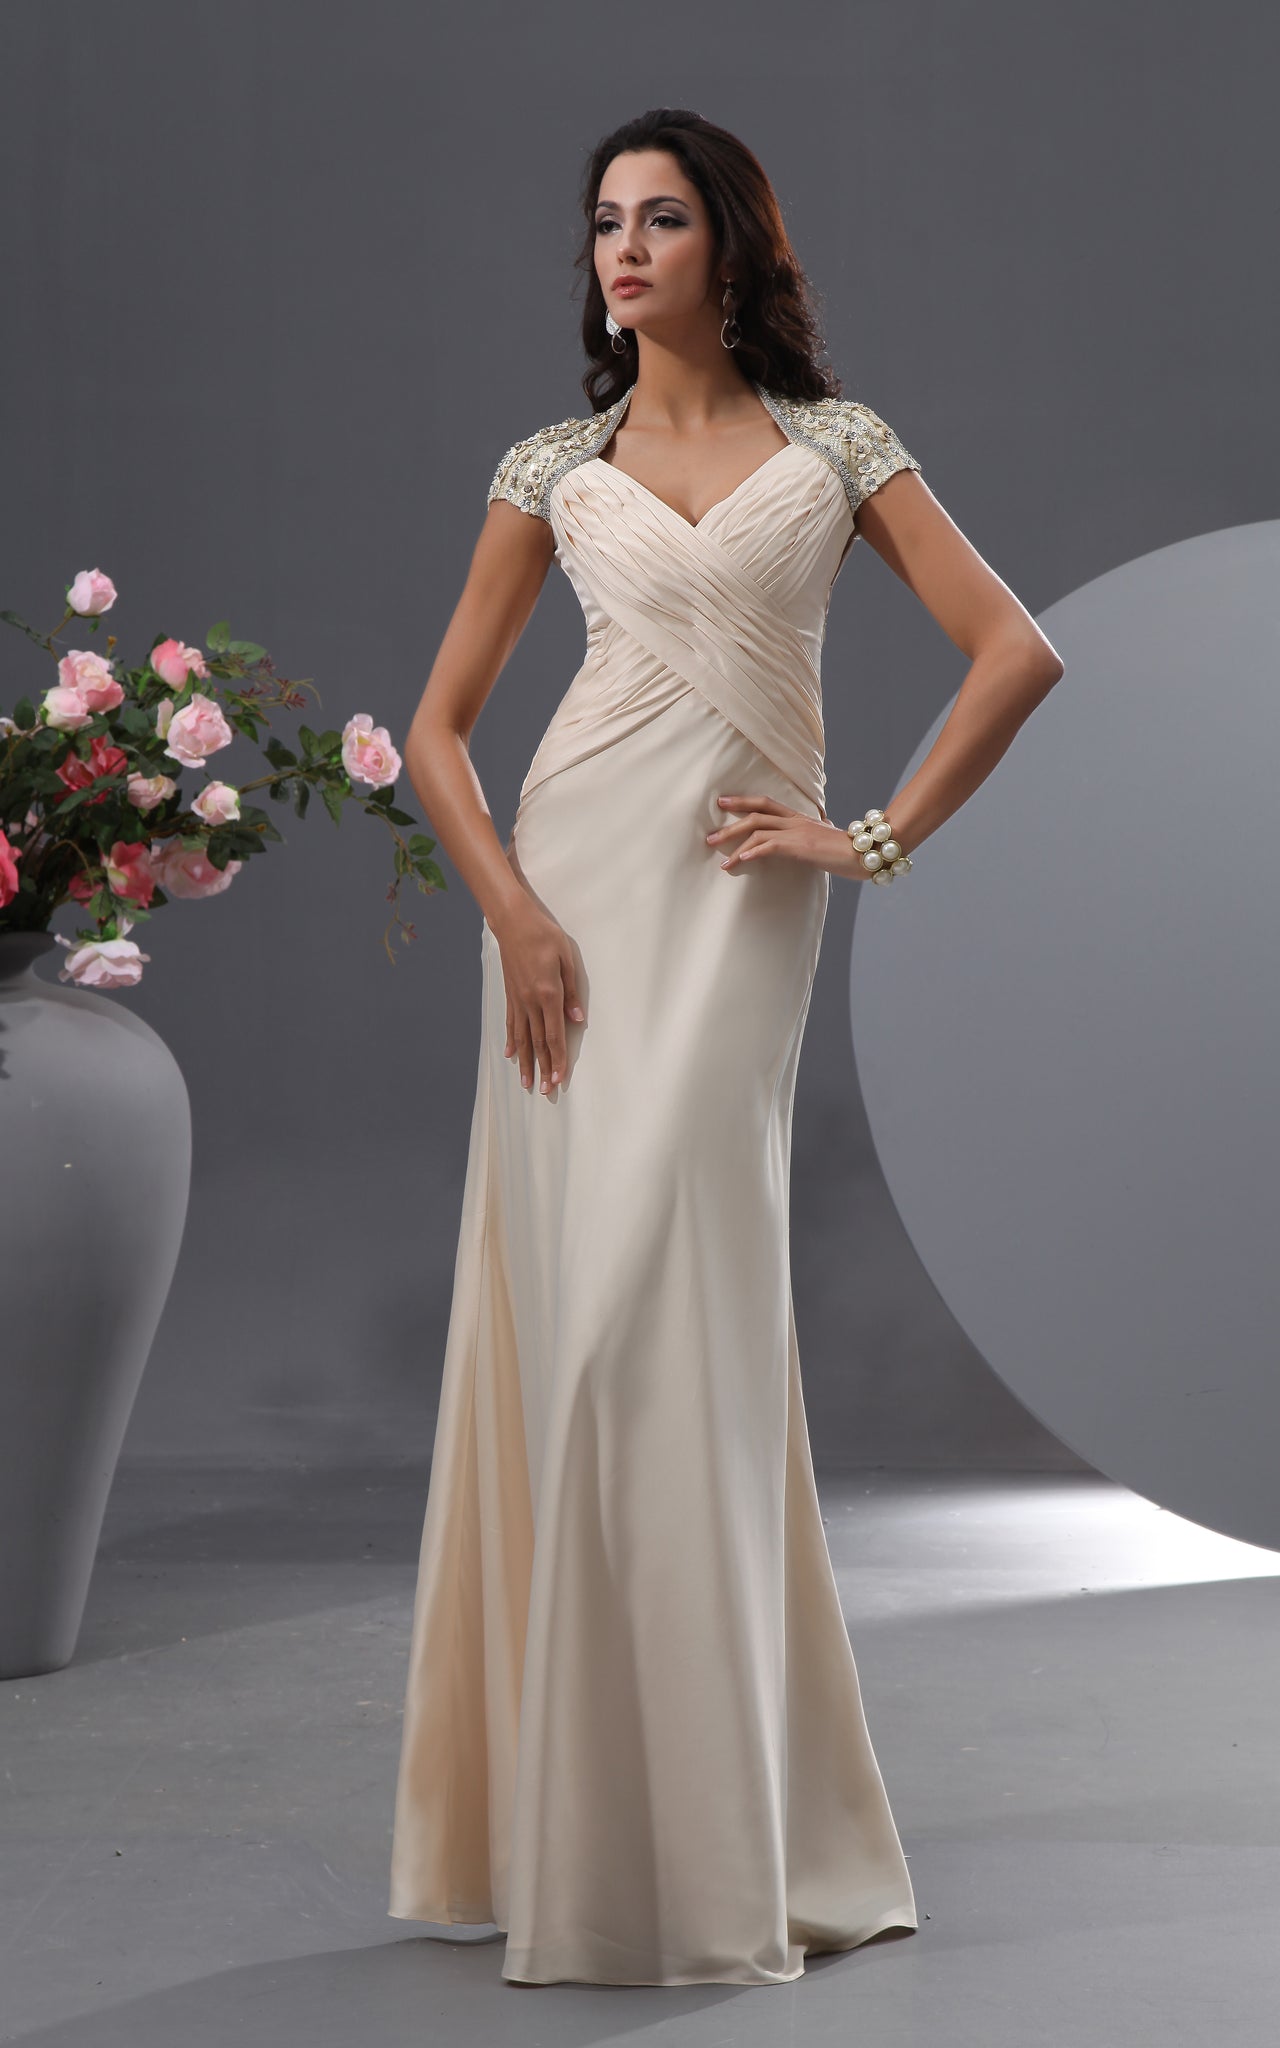 Queen Anne Graceful Gown With Shiny Floral Cap-Sleeves-GC_312334